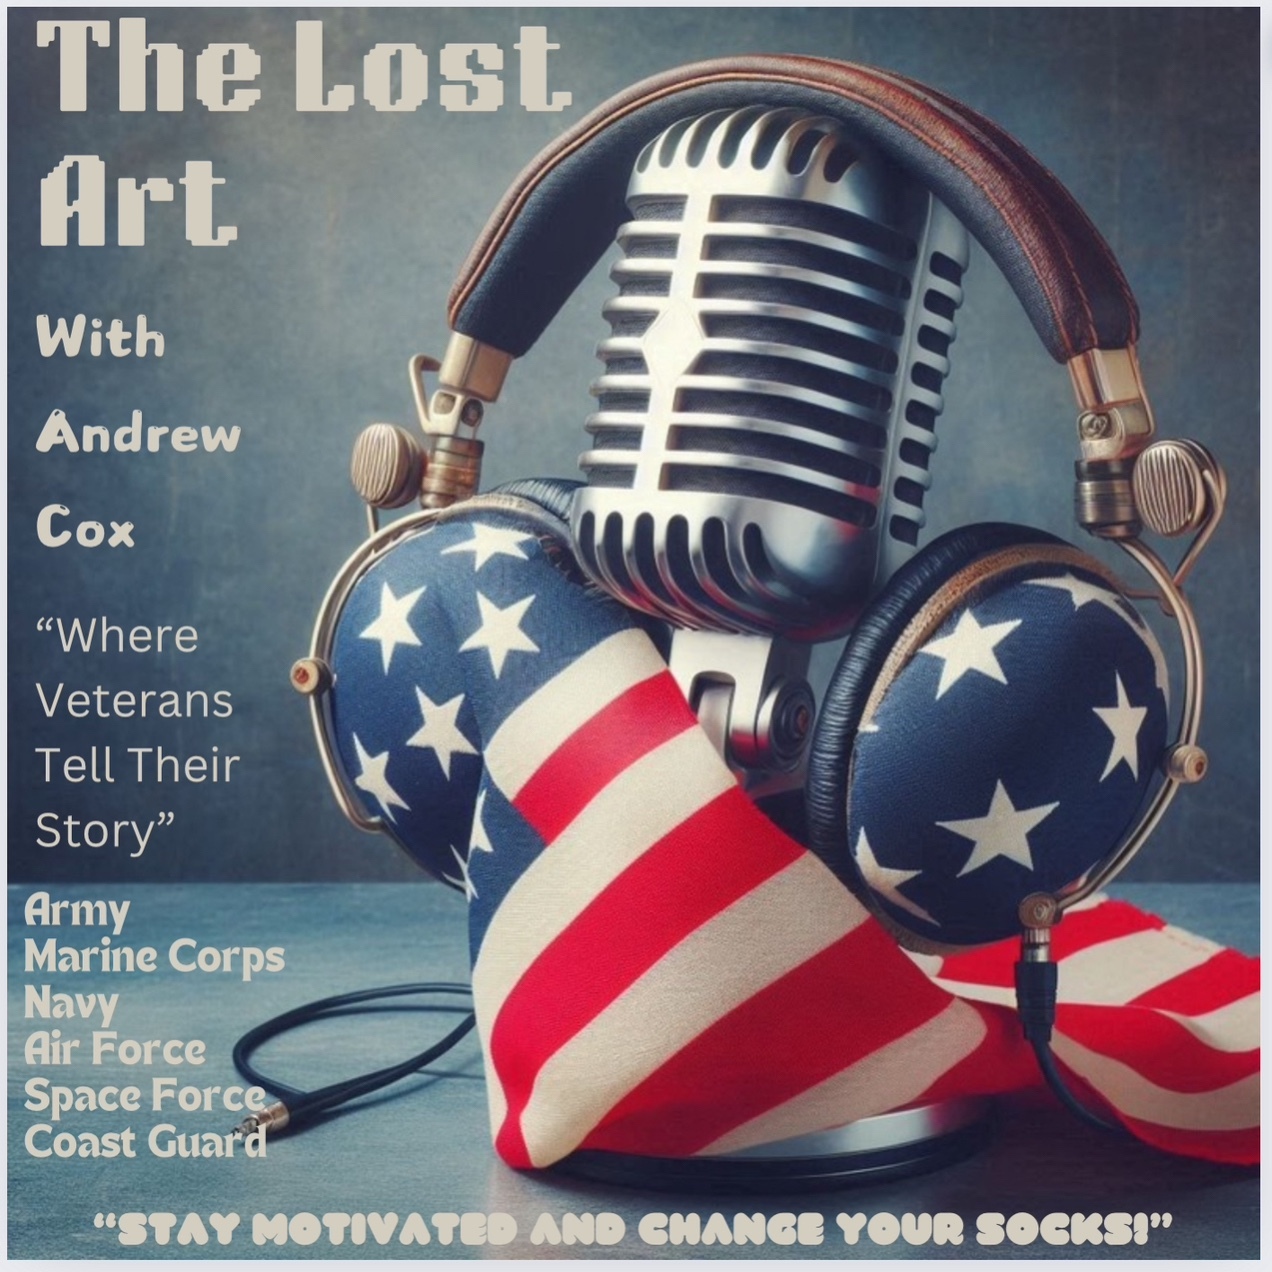 The Lost Art with Andrew Cox